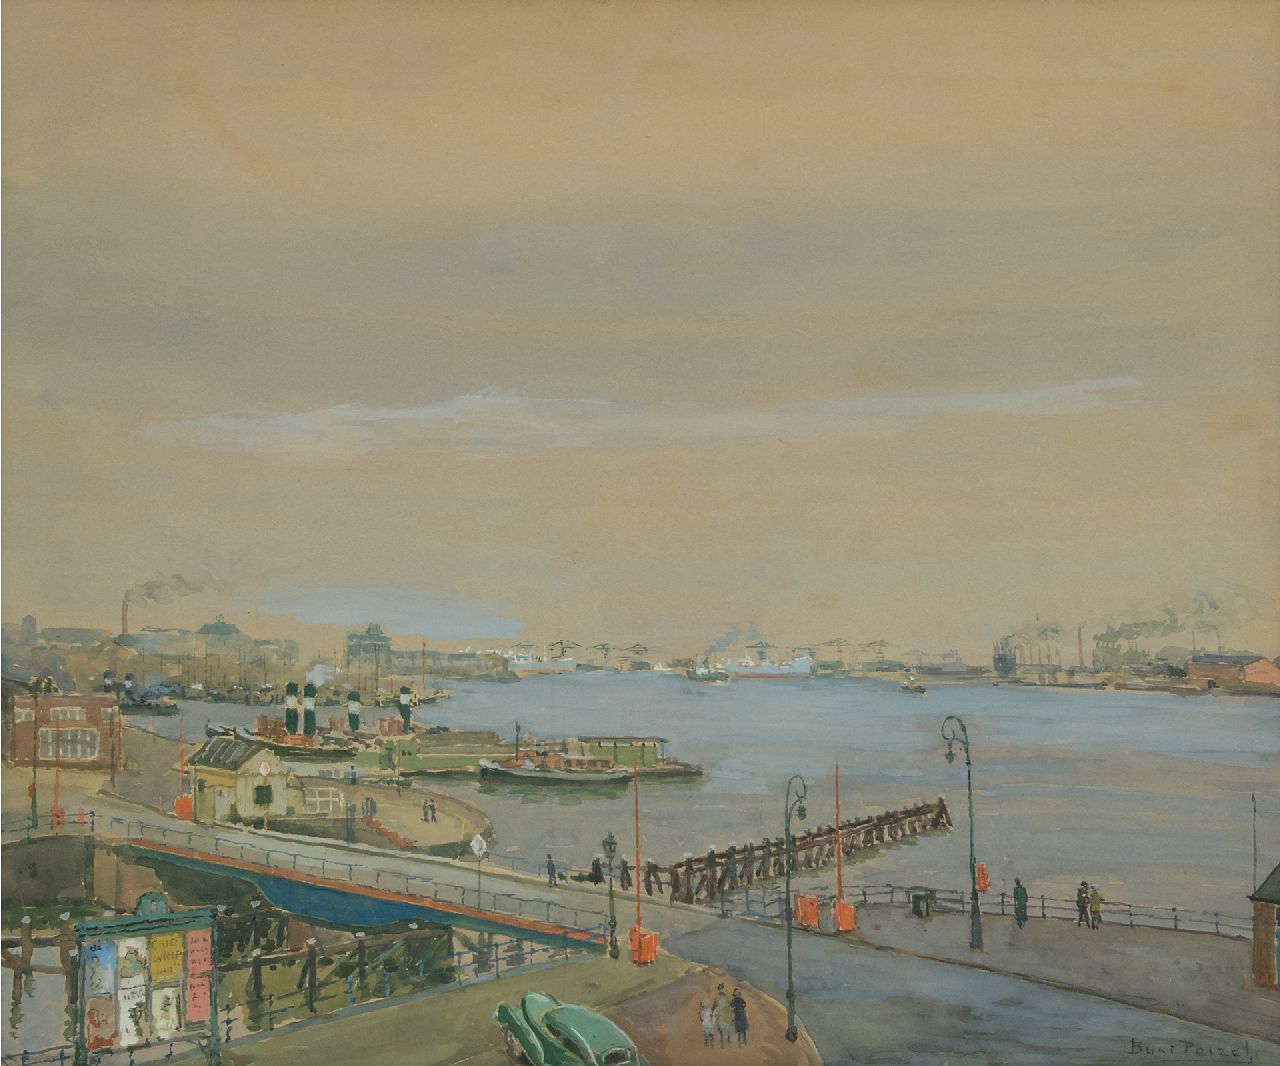 Peizel B.  | Bartele 'Bart' Peizel | Watercolours and drawings offered for sale | A view of the Amsterdam harbor, watercolour on painter's board 49.1 x 58.8 cm, signed l.r.